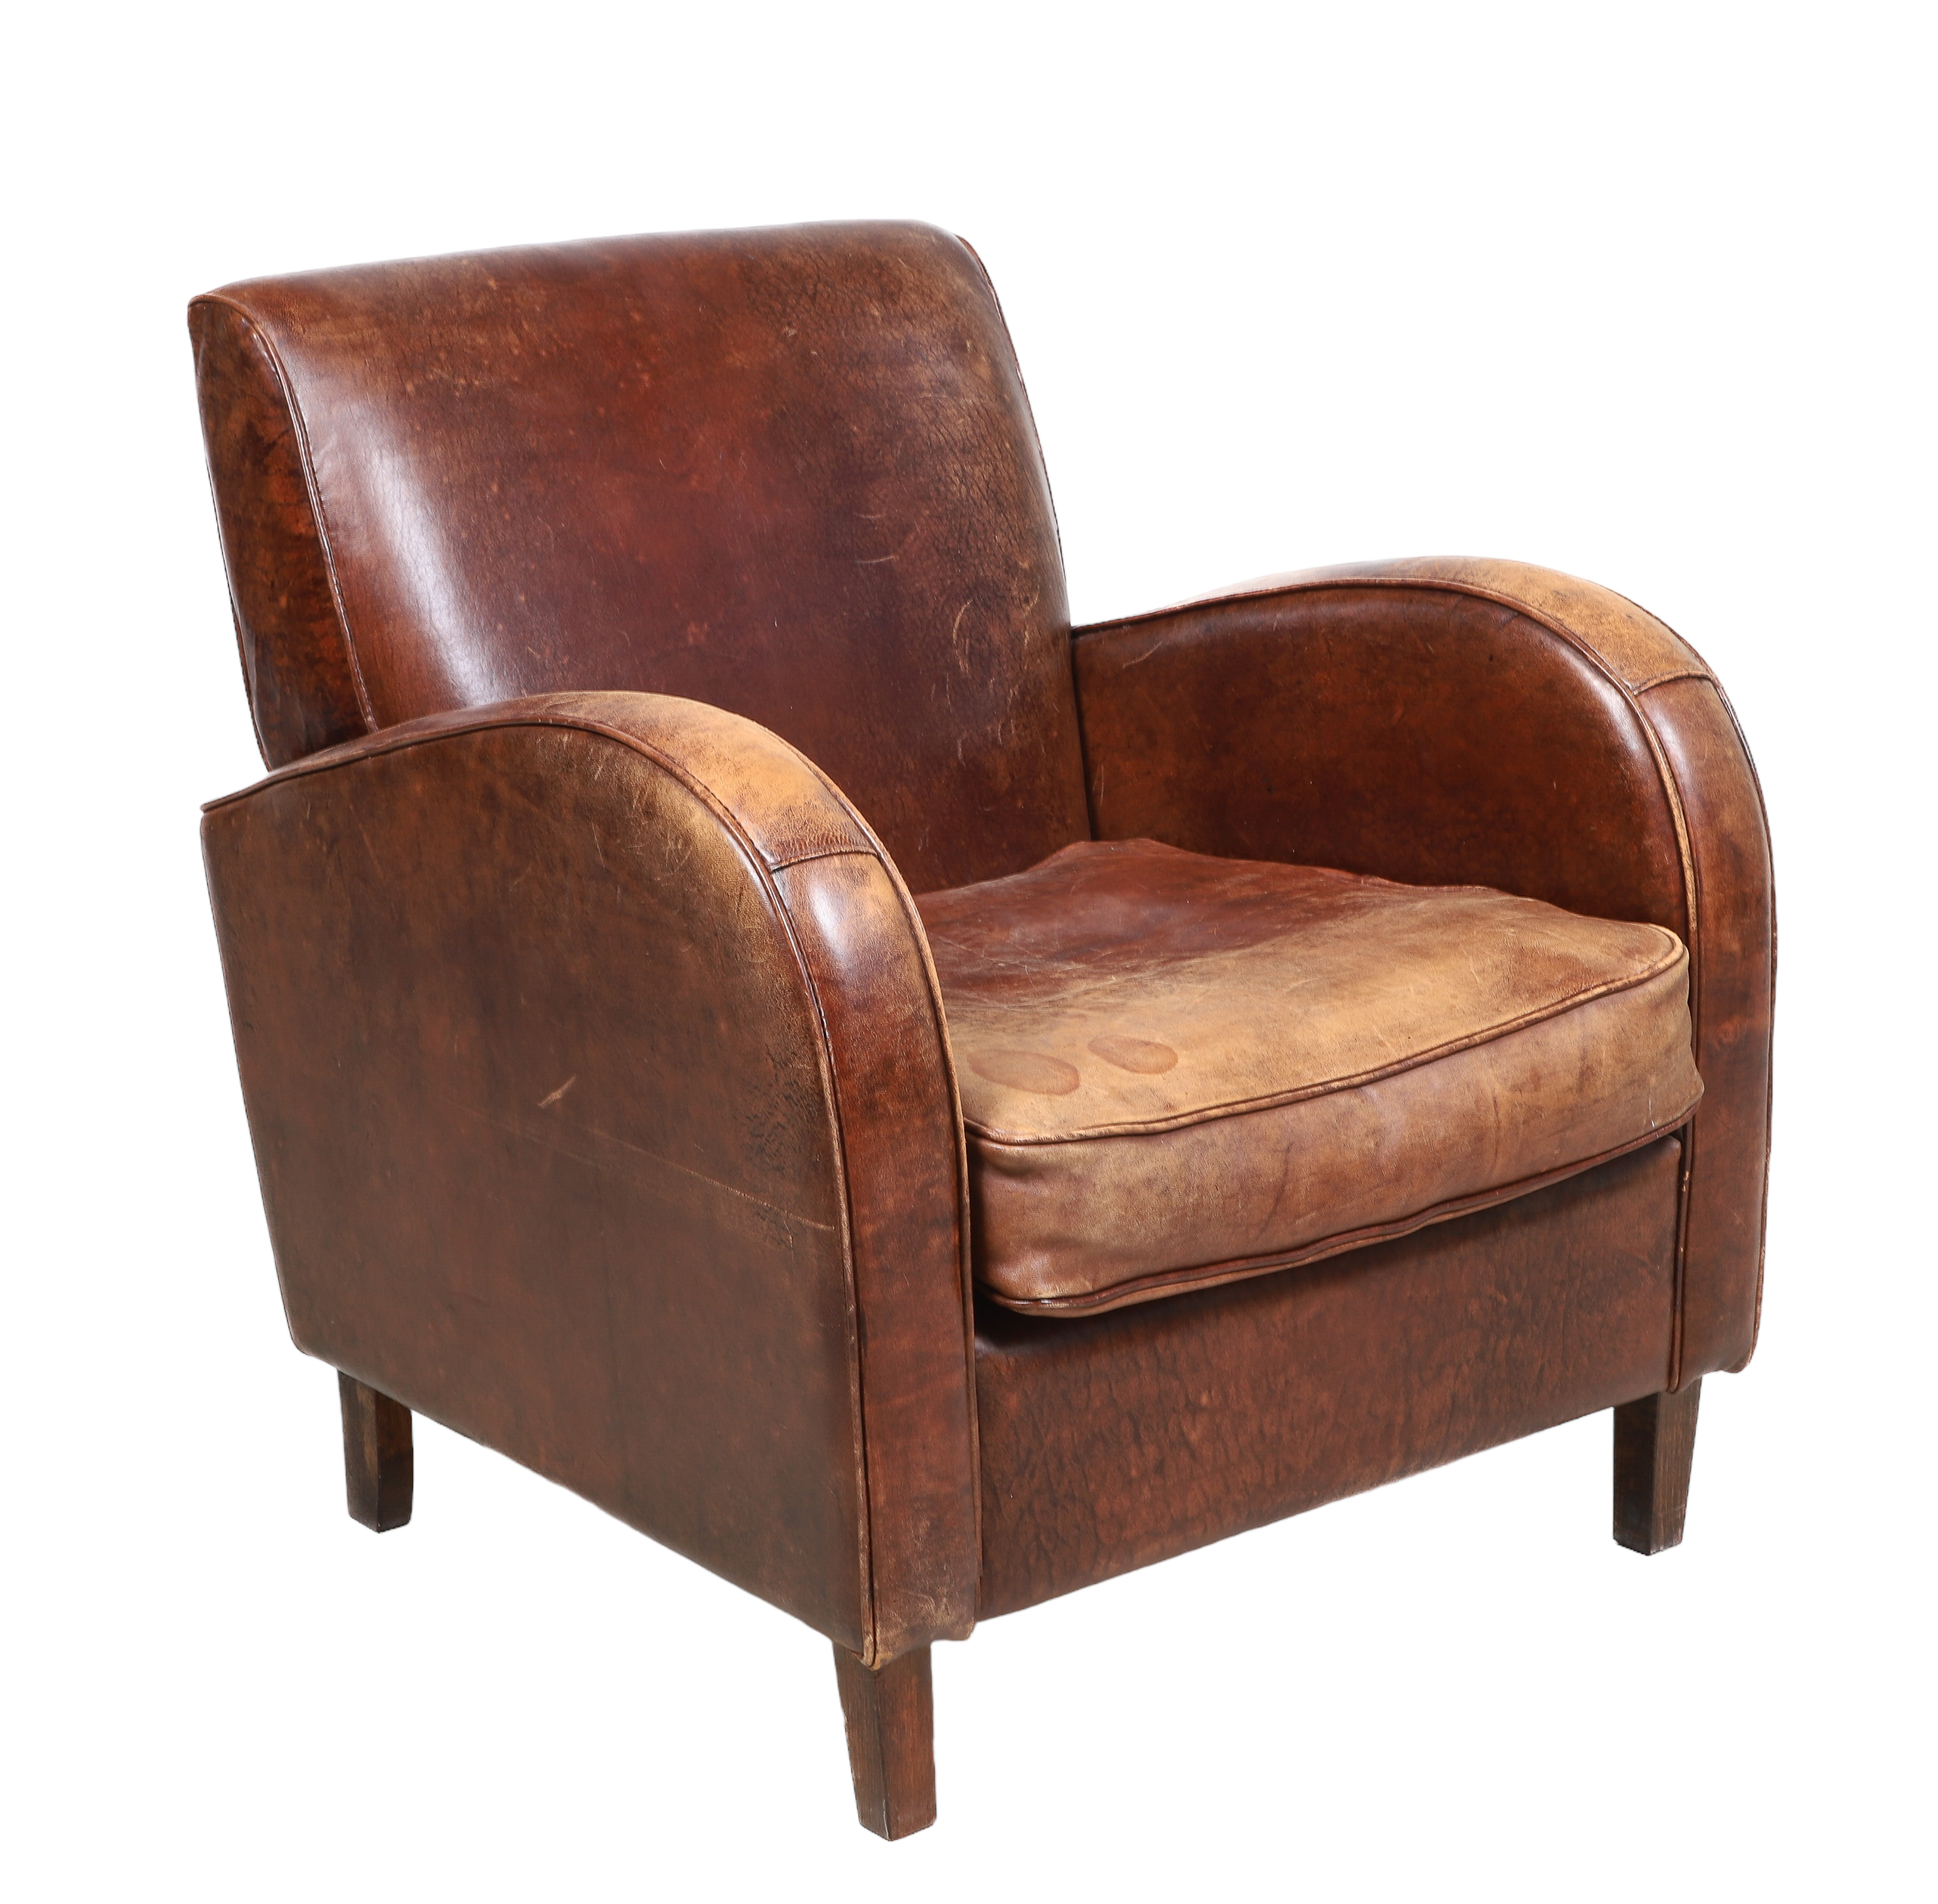 Contemporary leather lounge chair,